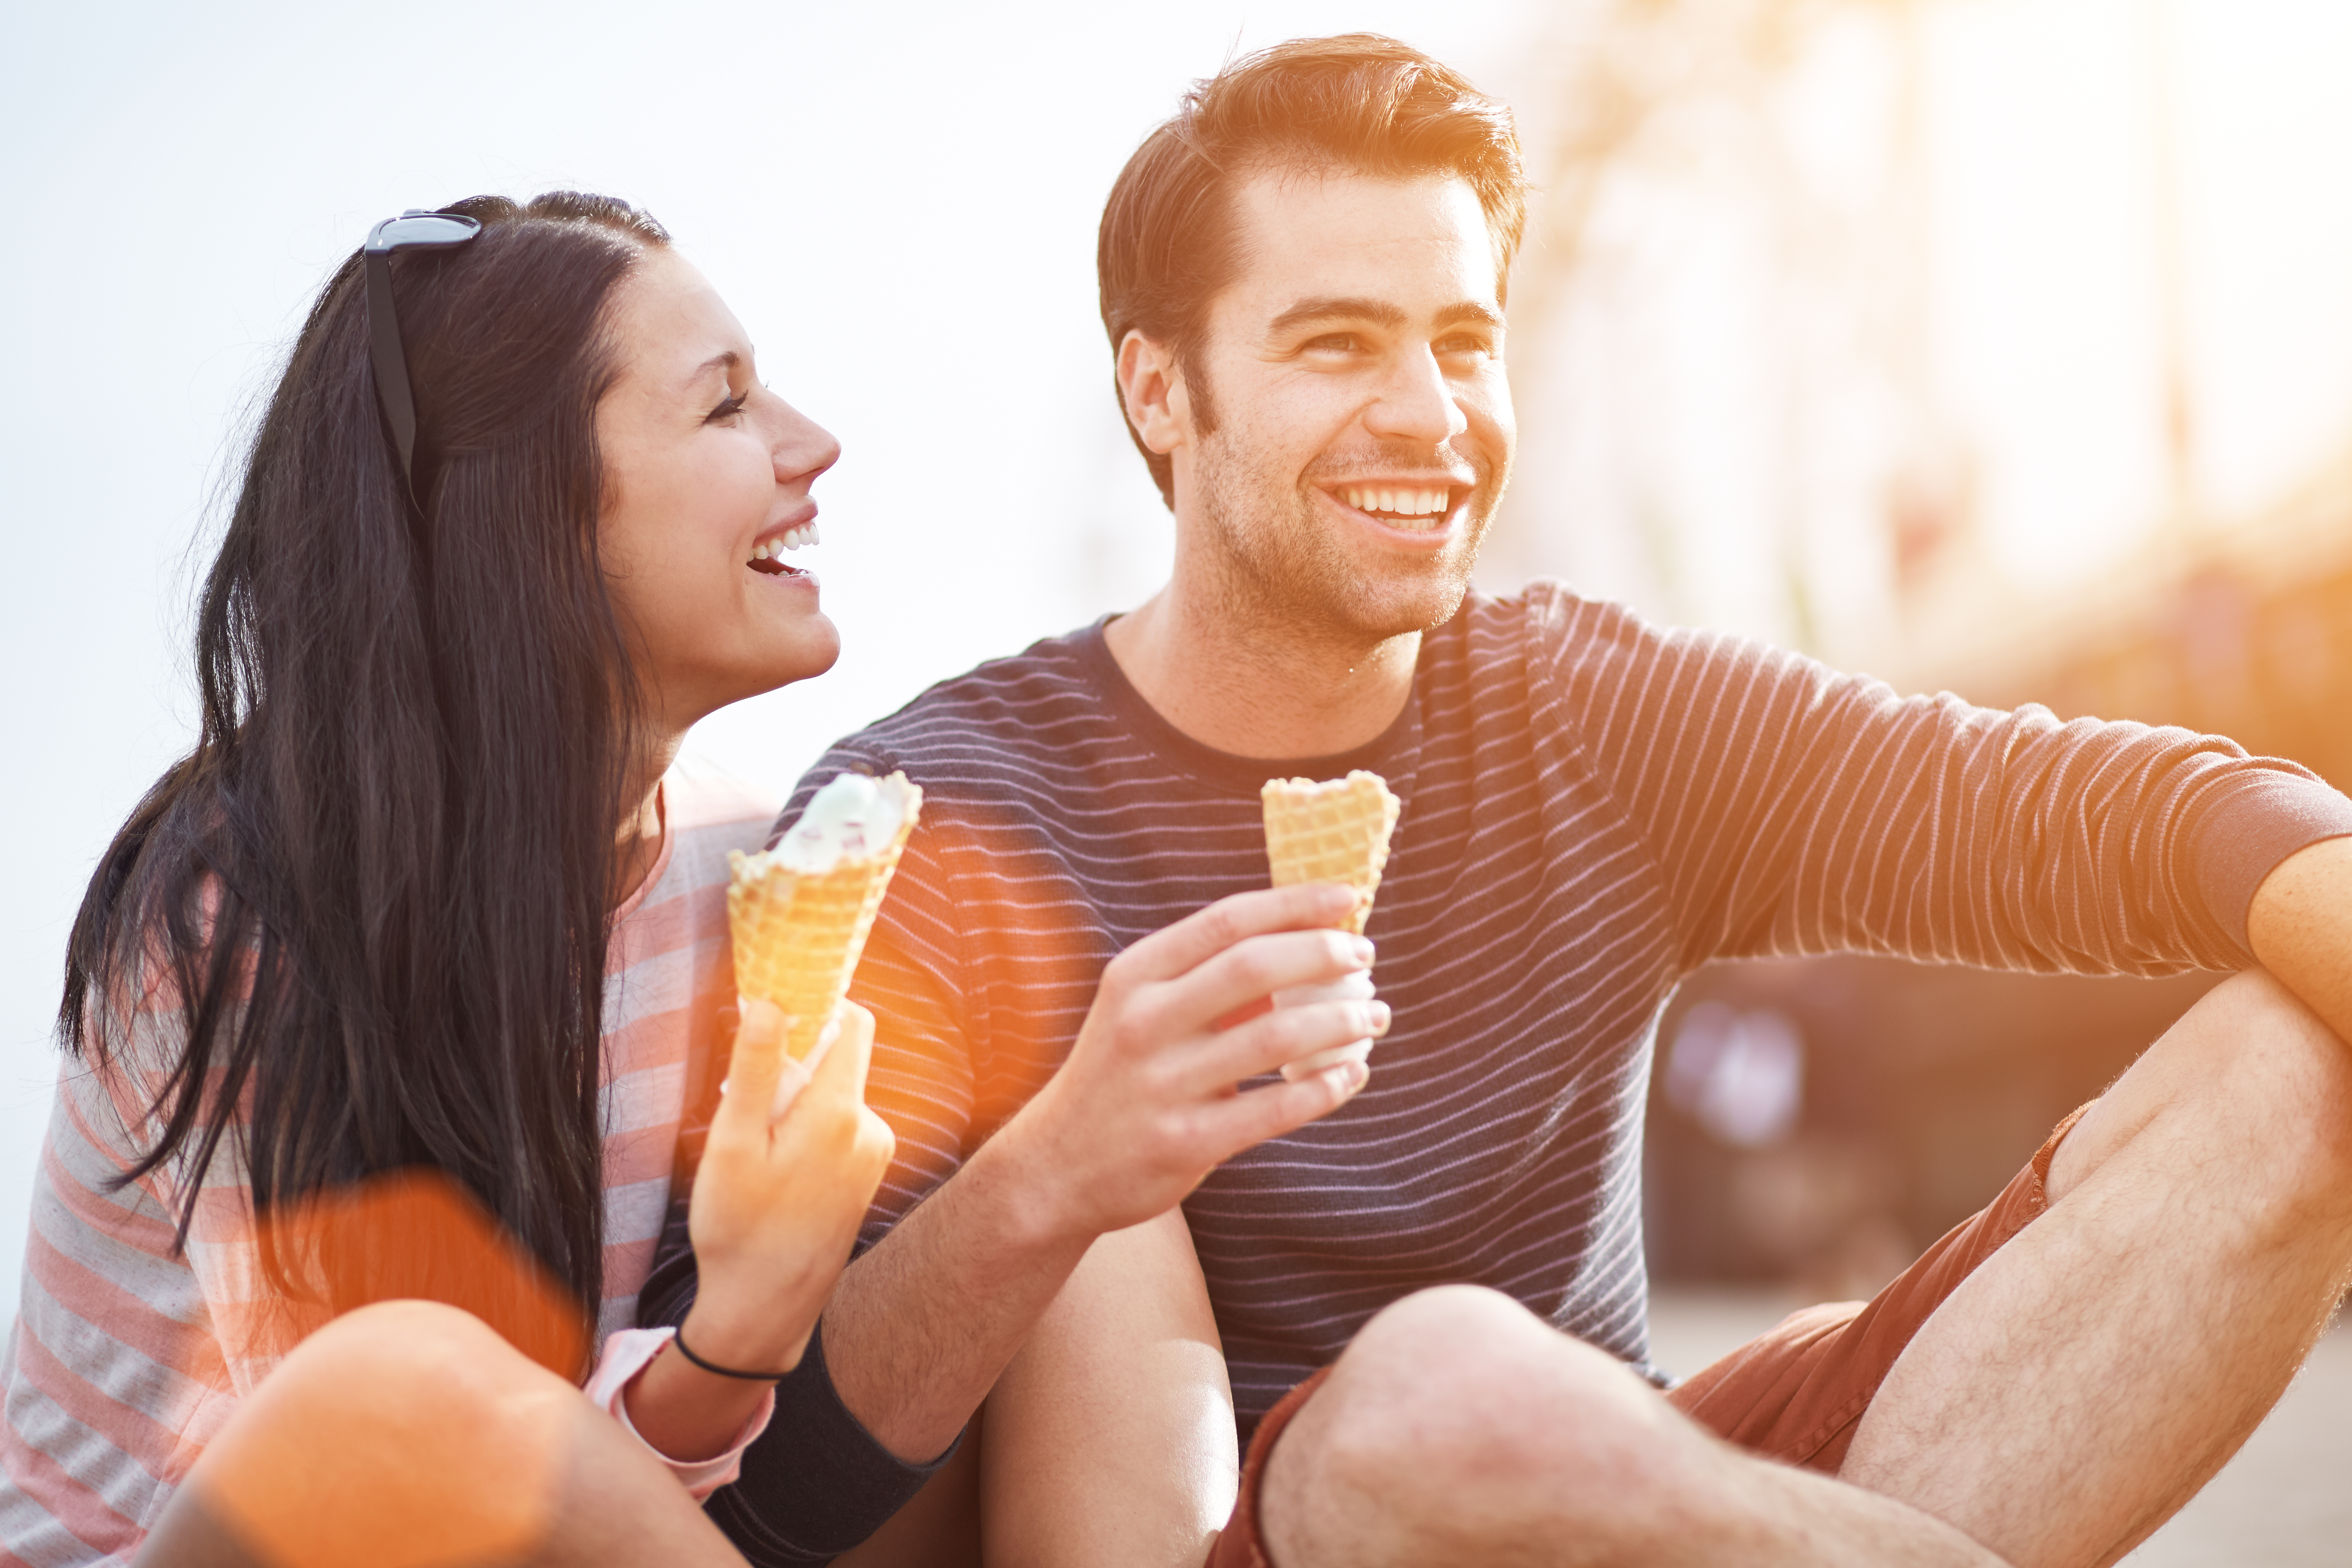 A man and woman laughing while eating ice-cream | Source: Shutterstock